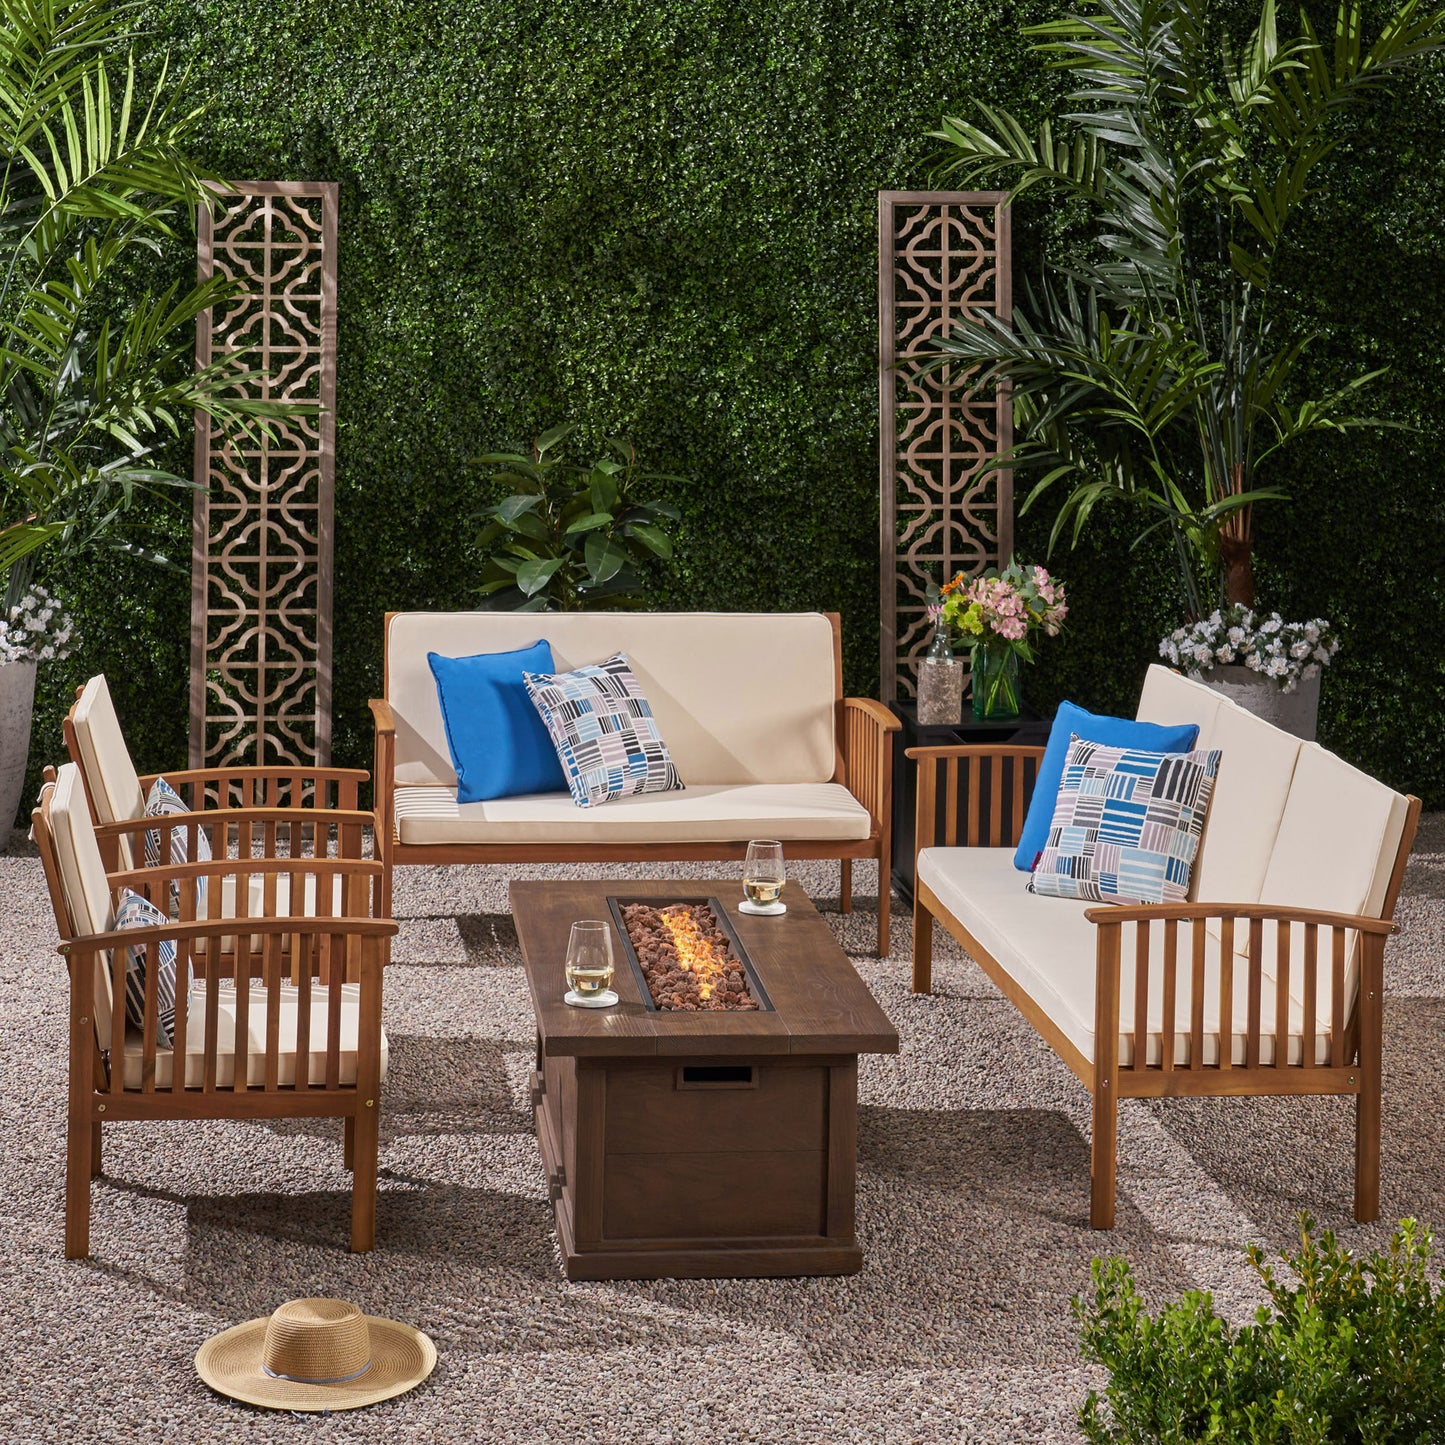 Jean Outdoor 6 Piece Acacia Wood Sofa and Loveseat Conversational Set with Fire Pit